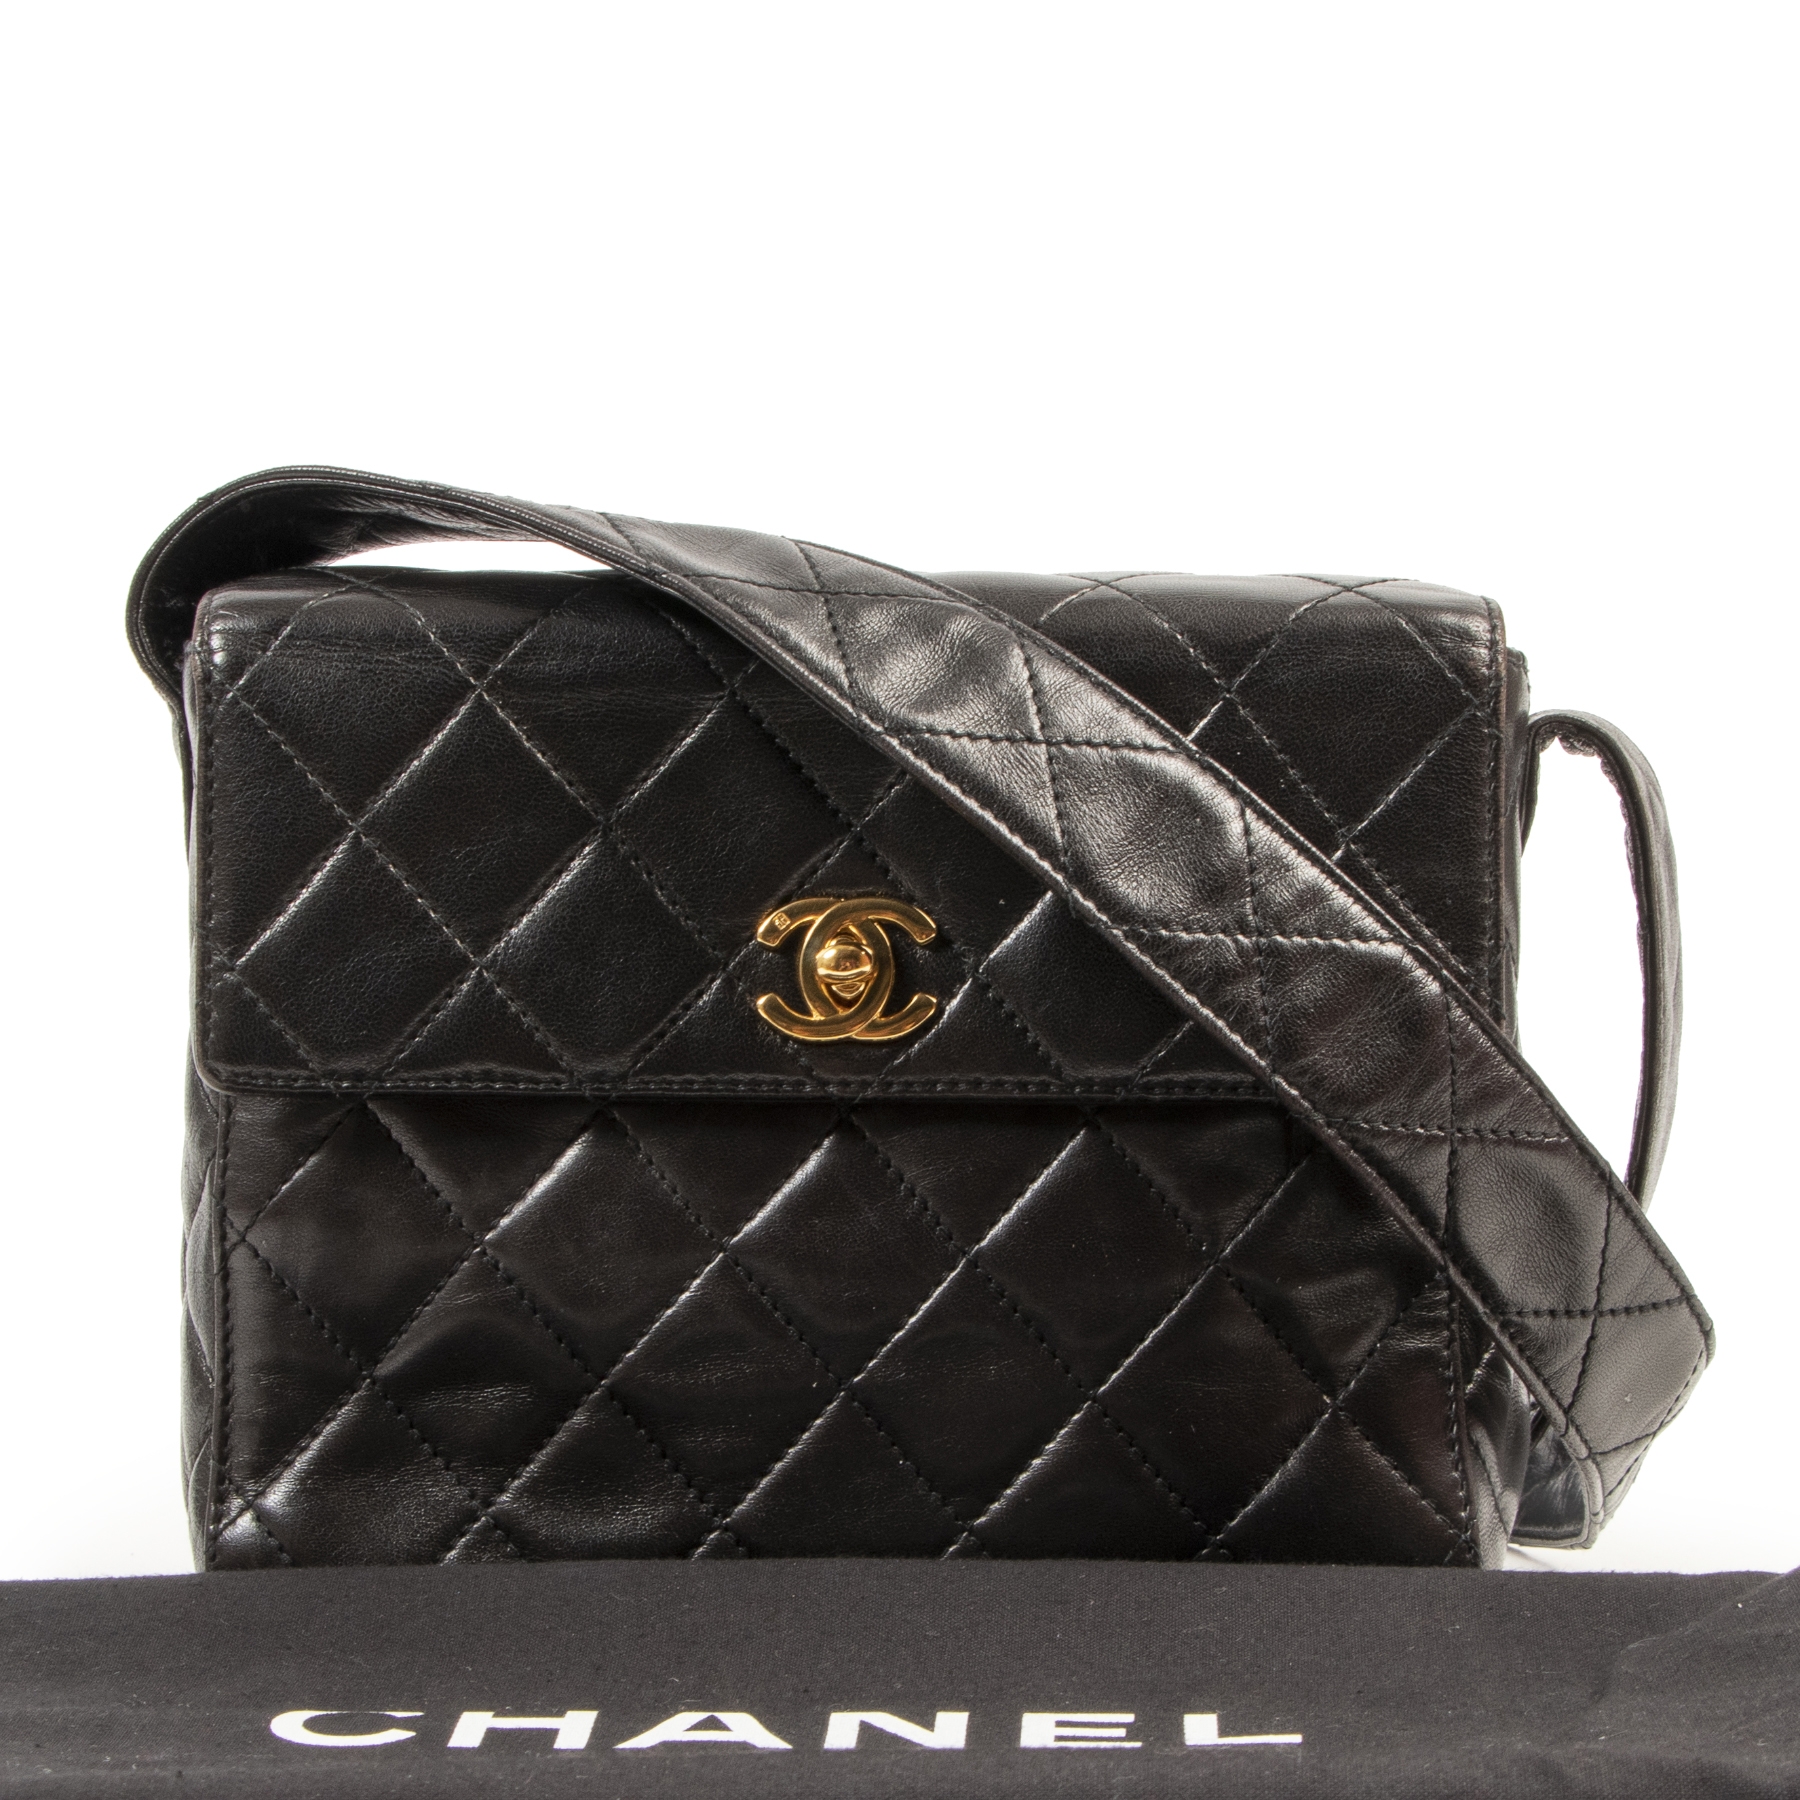 Chanel Black Patent Leather Vintage Vanity Cosmetic Bag Chanel